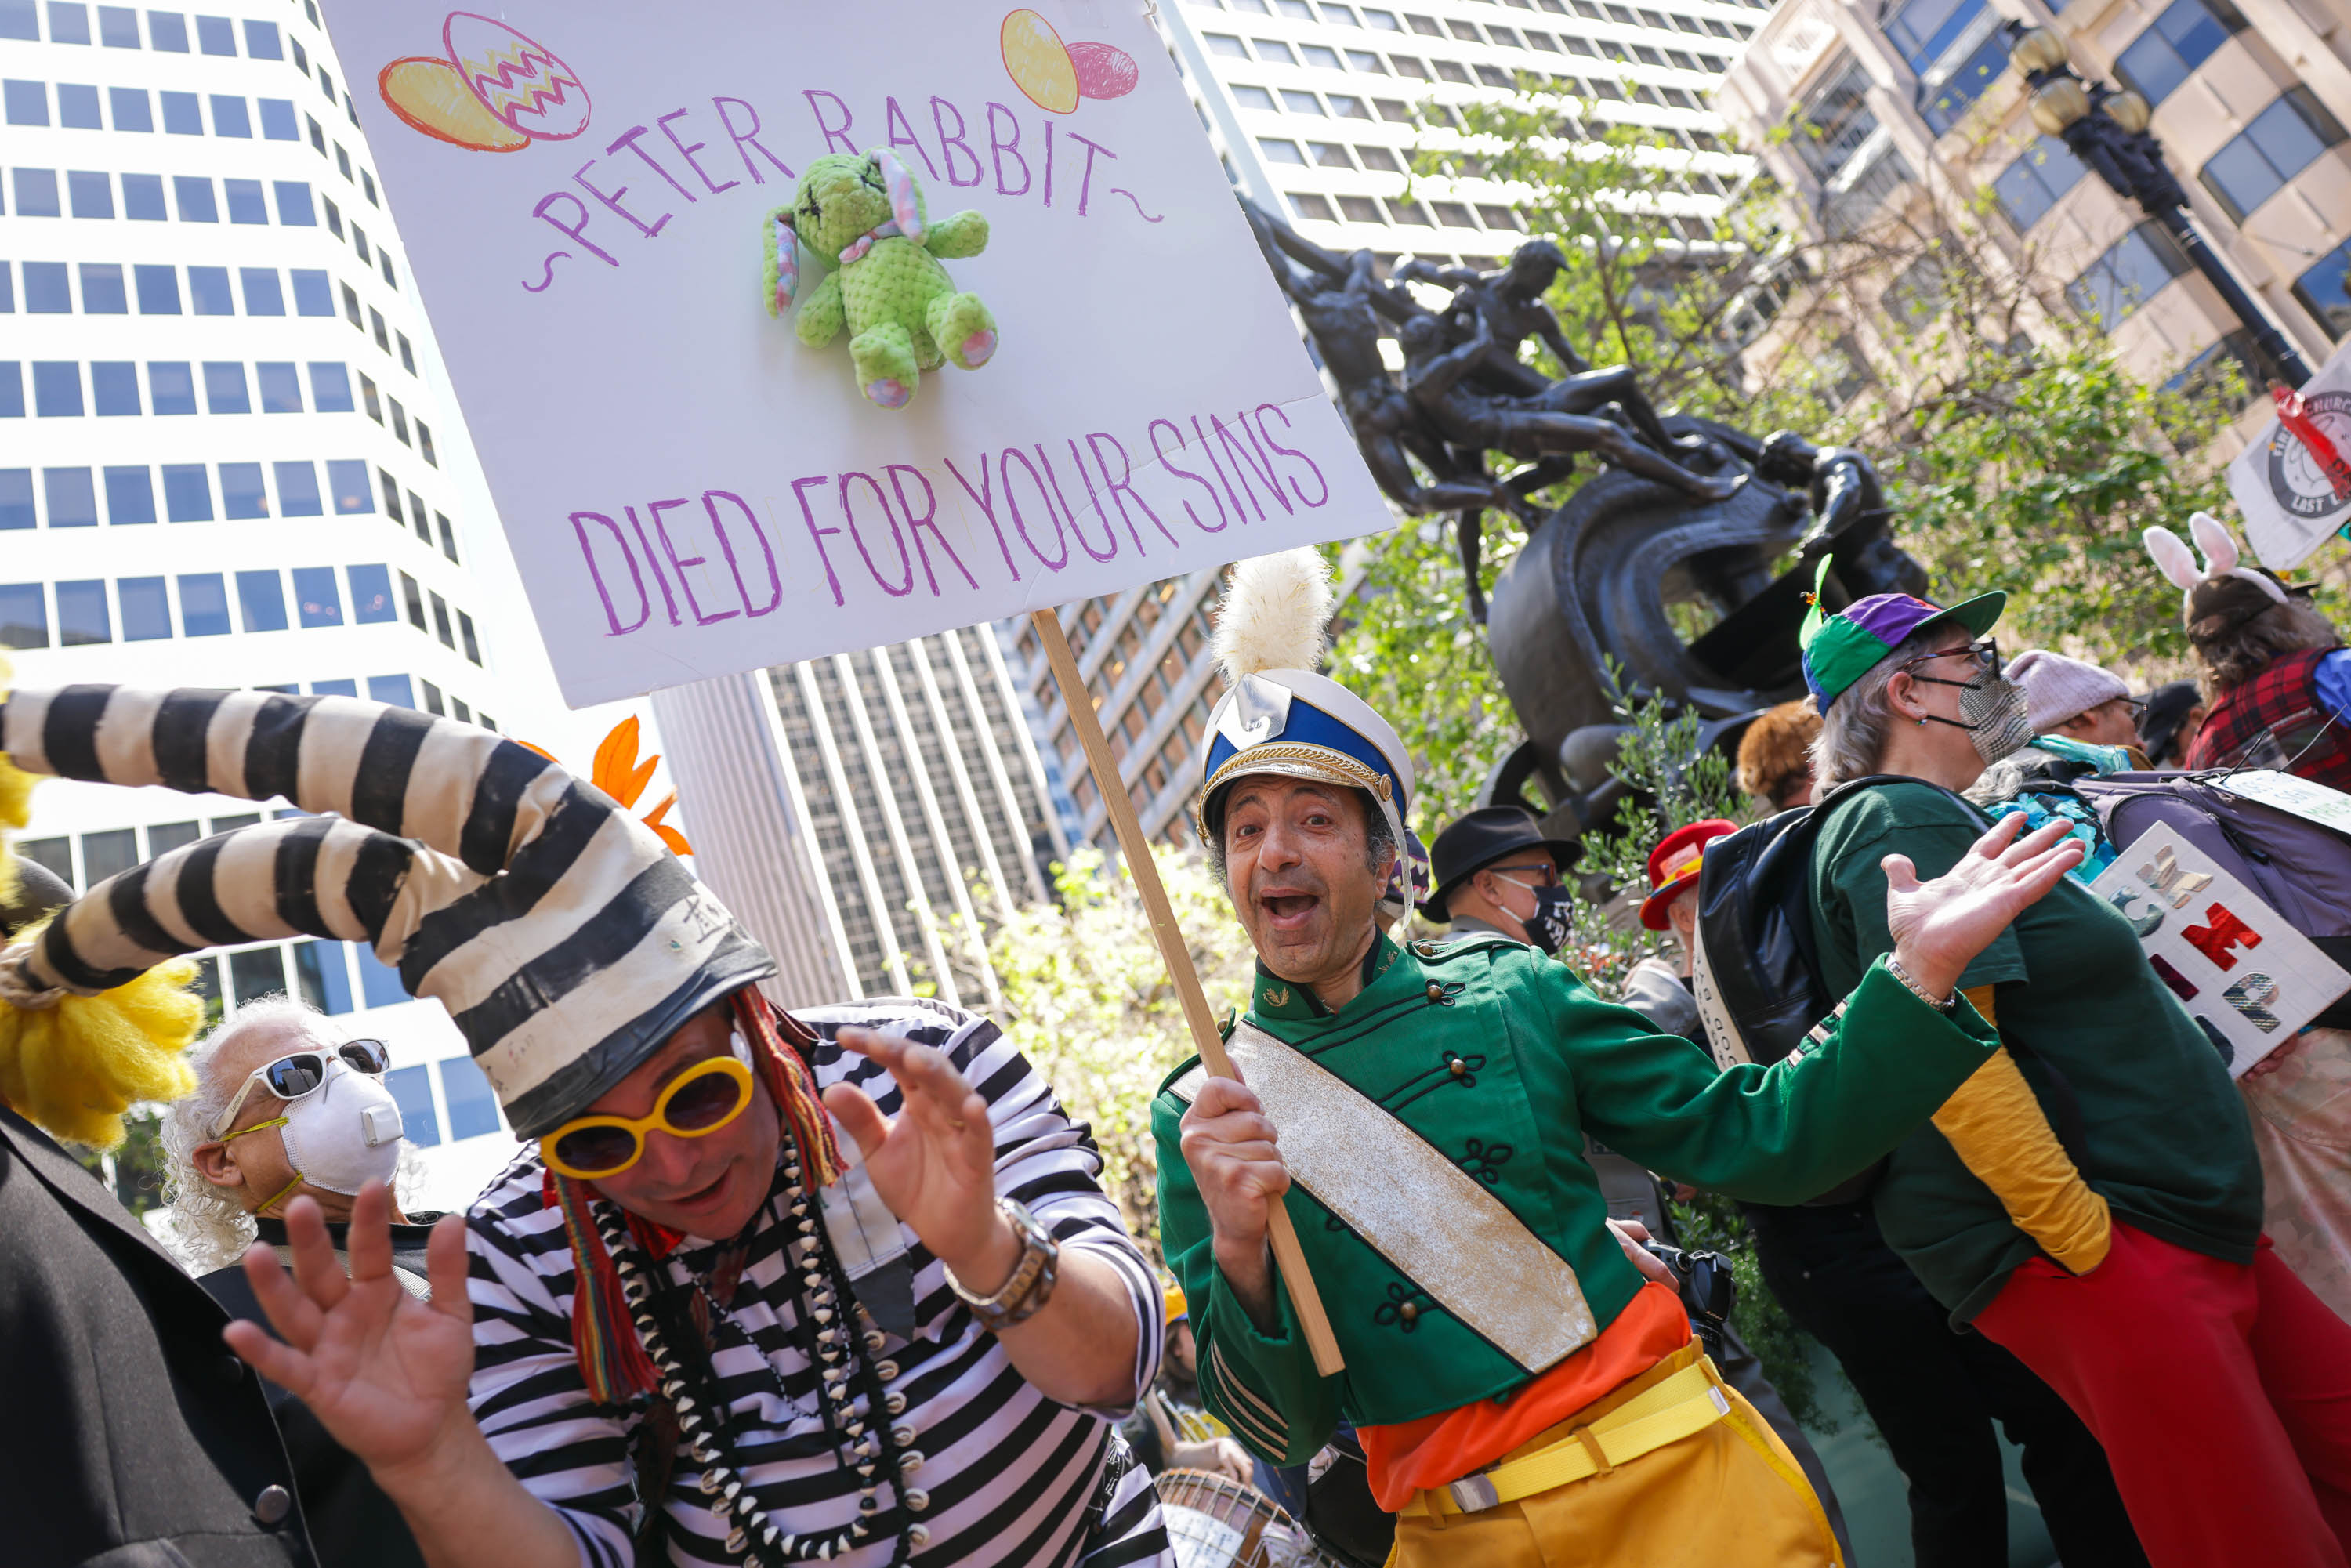 People in colorful costumes, one holding a sign saying &quot;Peter Rabbit died for your sins,&quot; at an outdoor gathering.